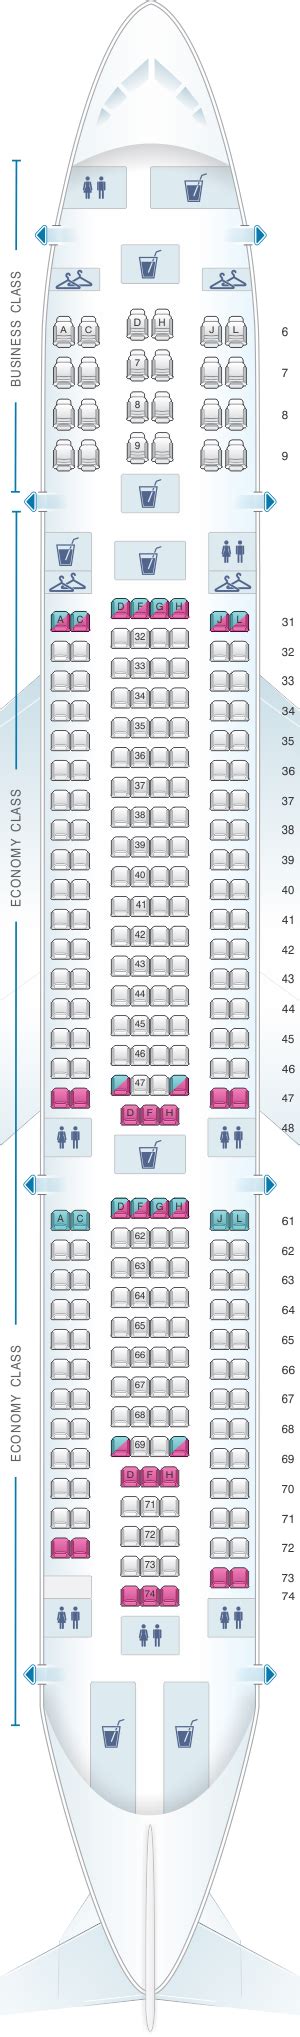 Seat Map China Eastern Airlines Airbus A330 200 264pax Seatmaestro